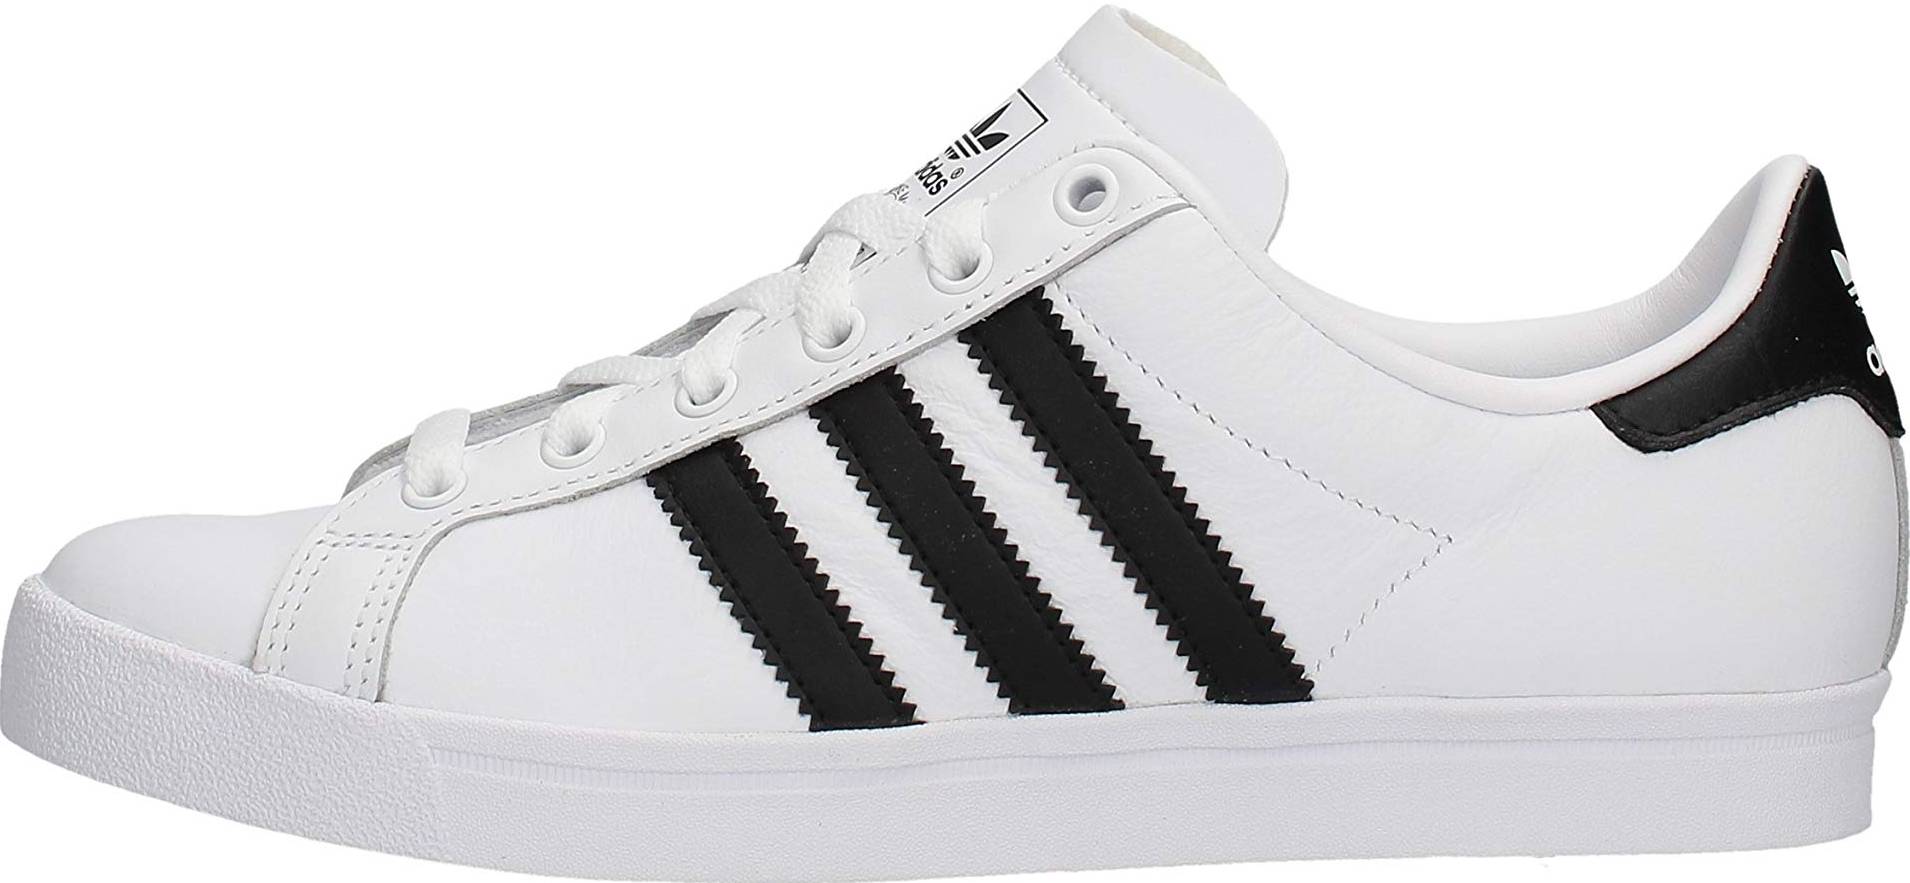 Only $51 + Review of Adidas Coast Star 